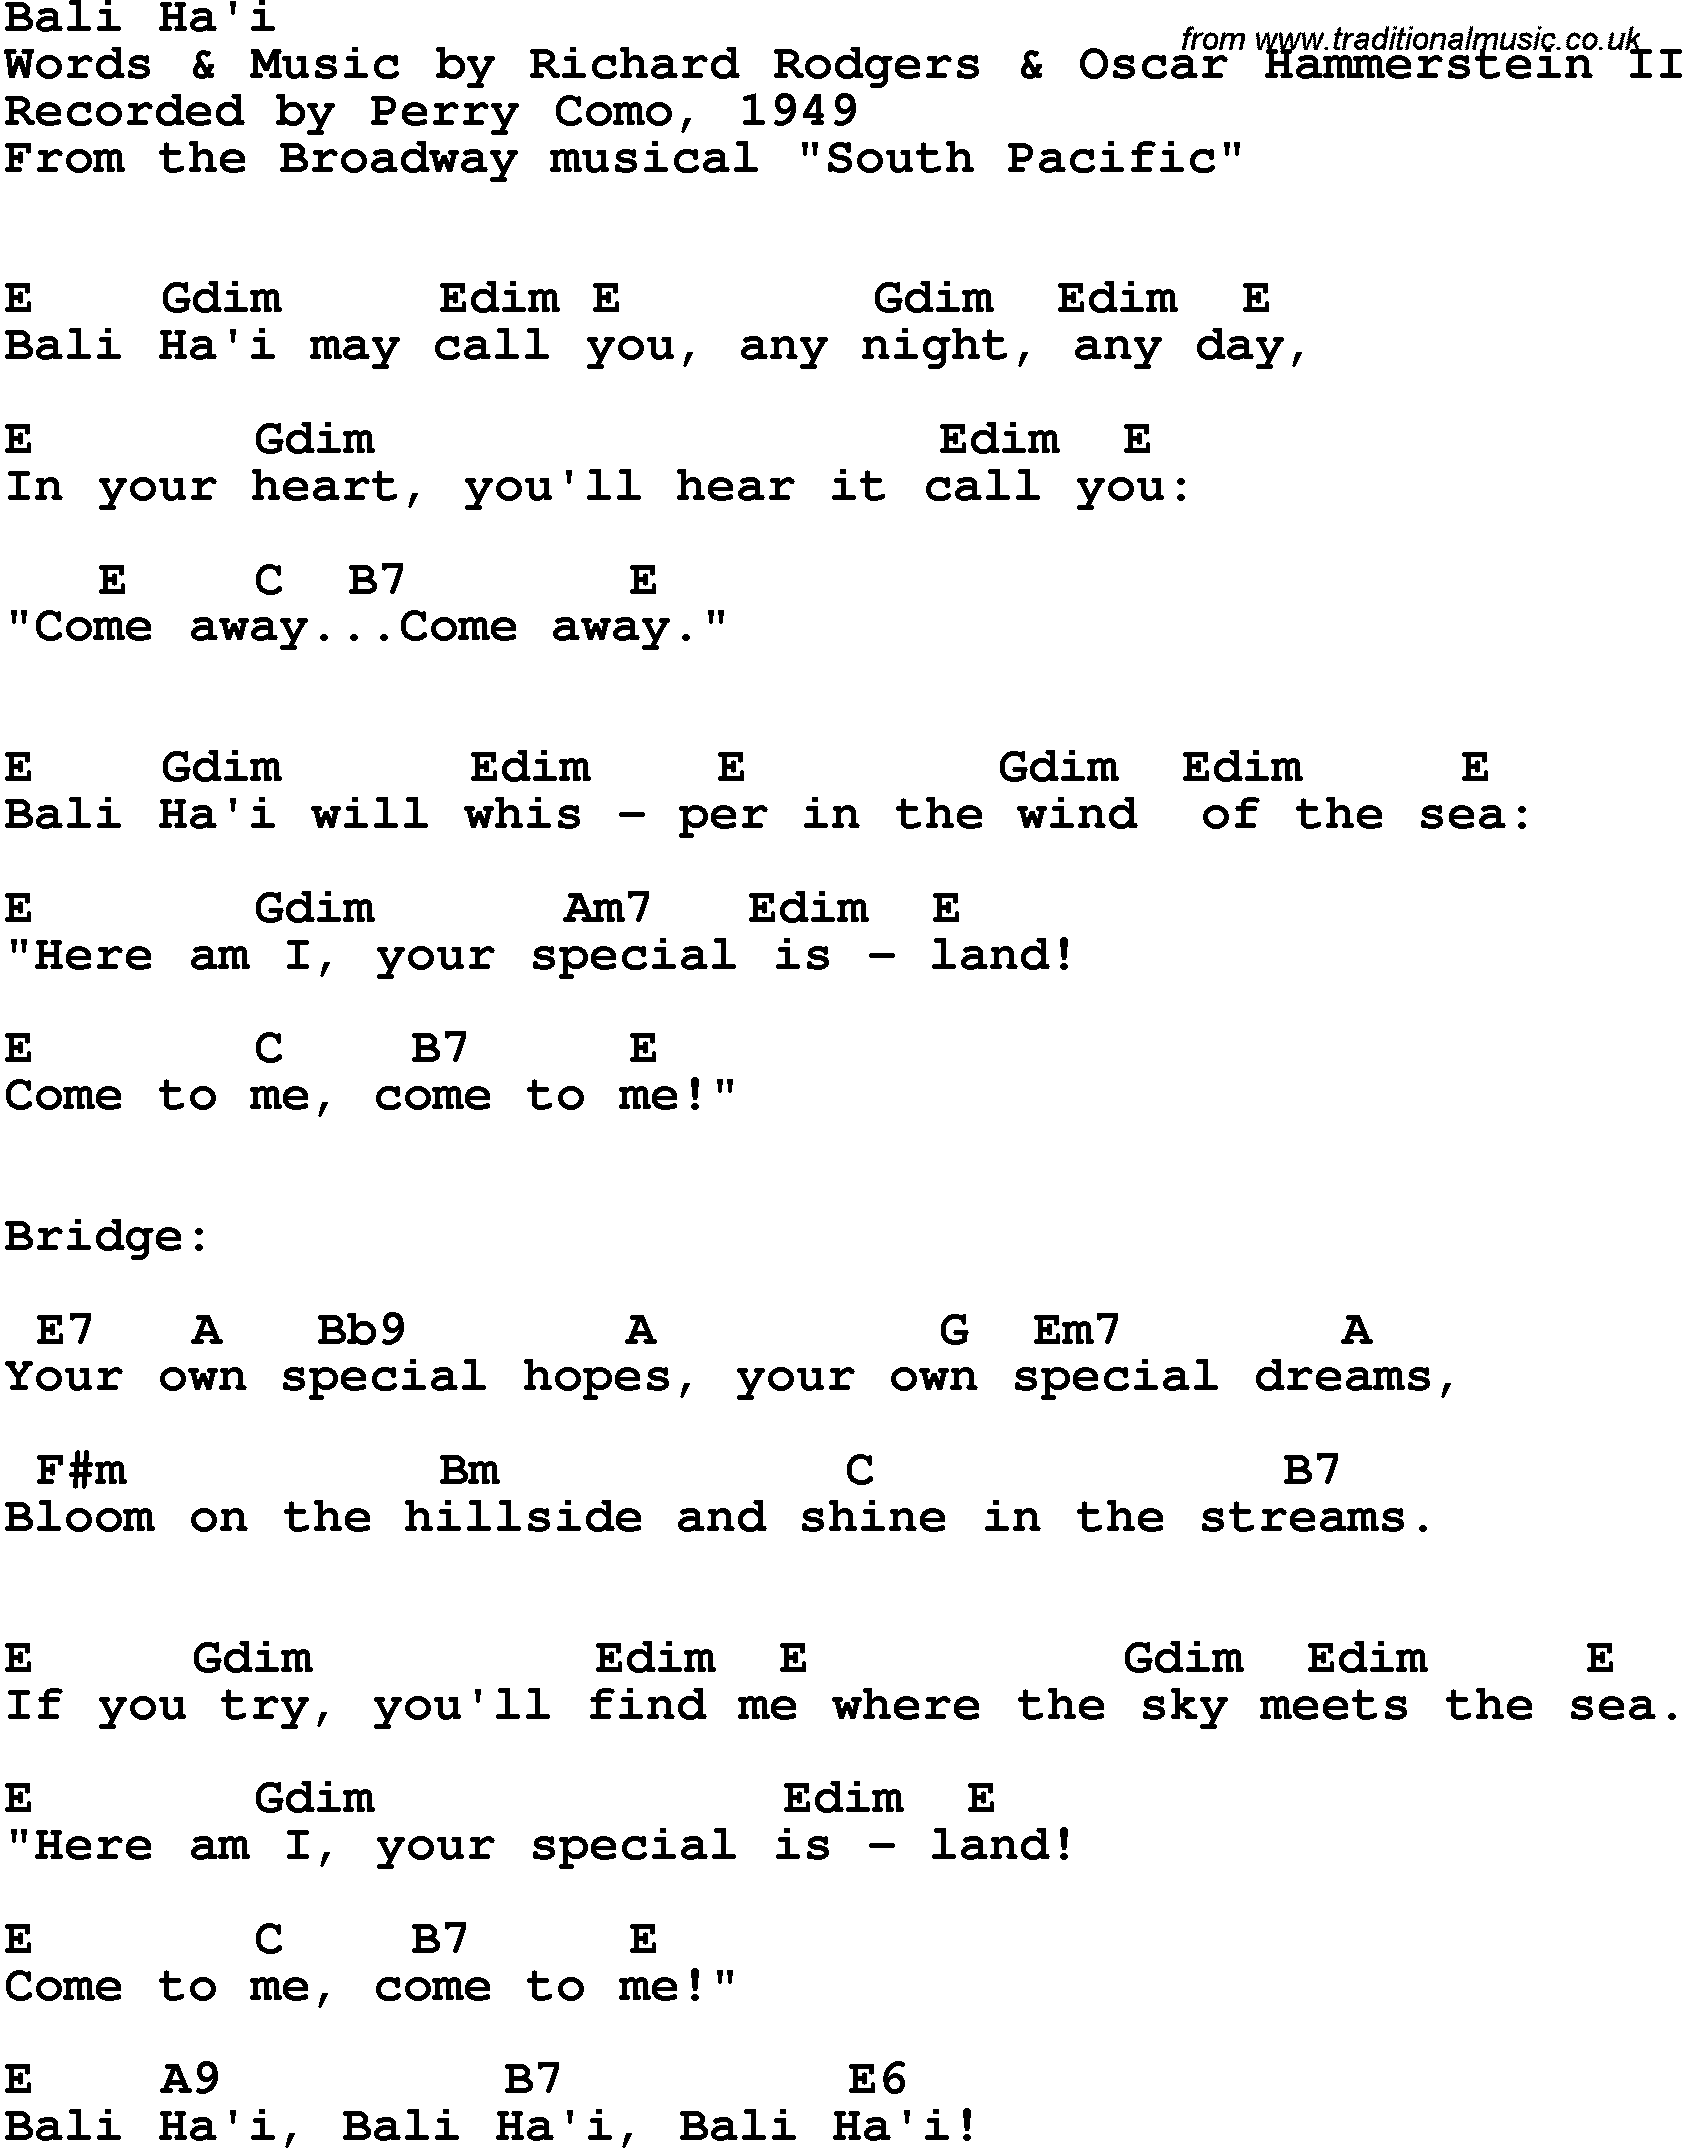 Song Lyrics with guitar chords for Bali Ha'i - Perry Como, 1949